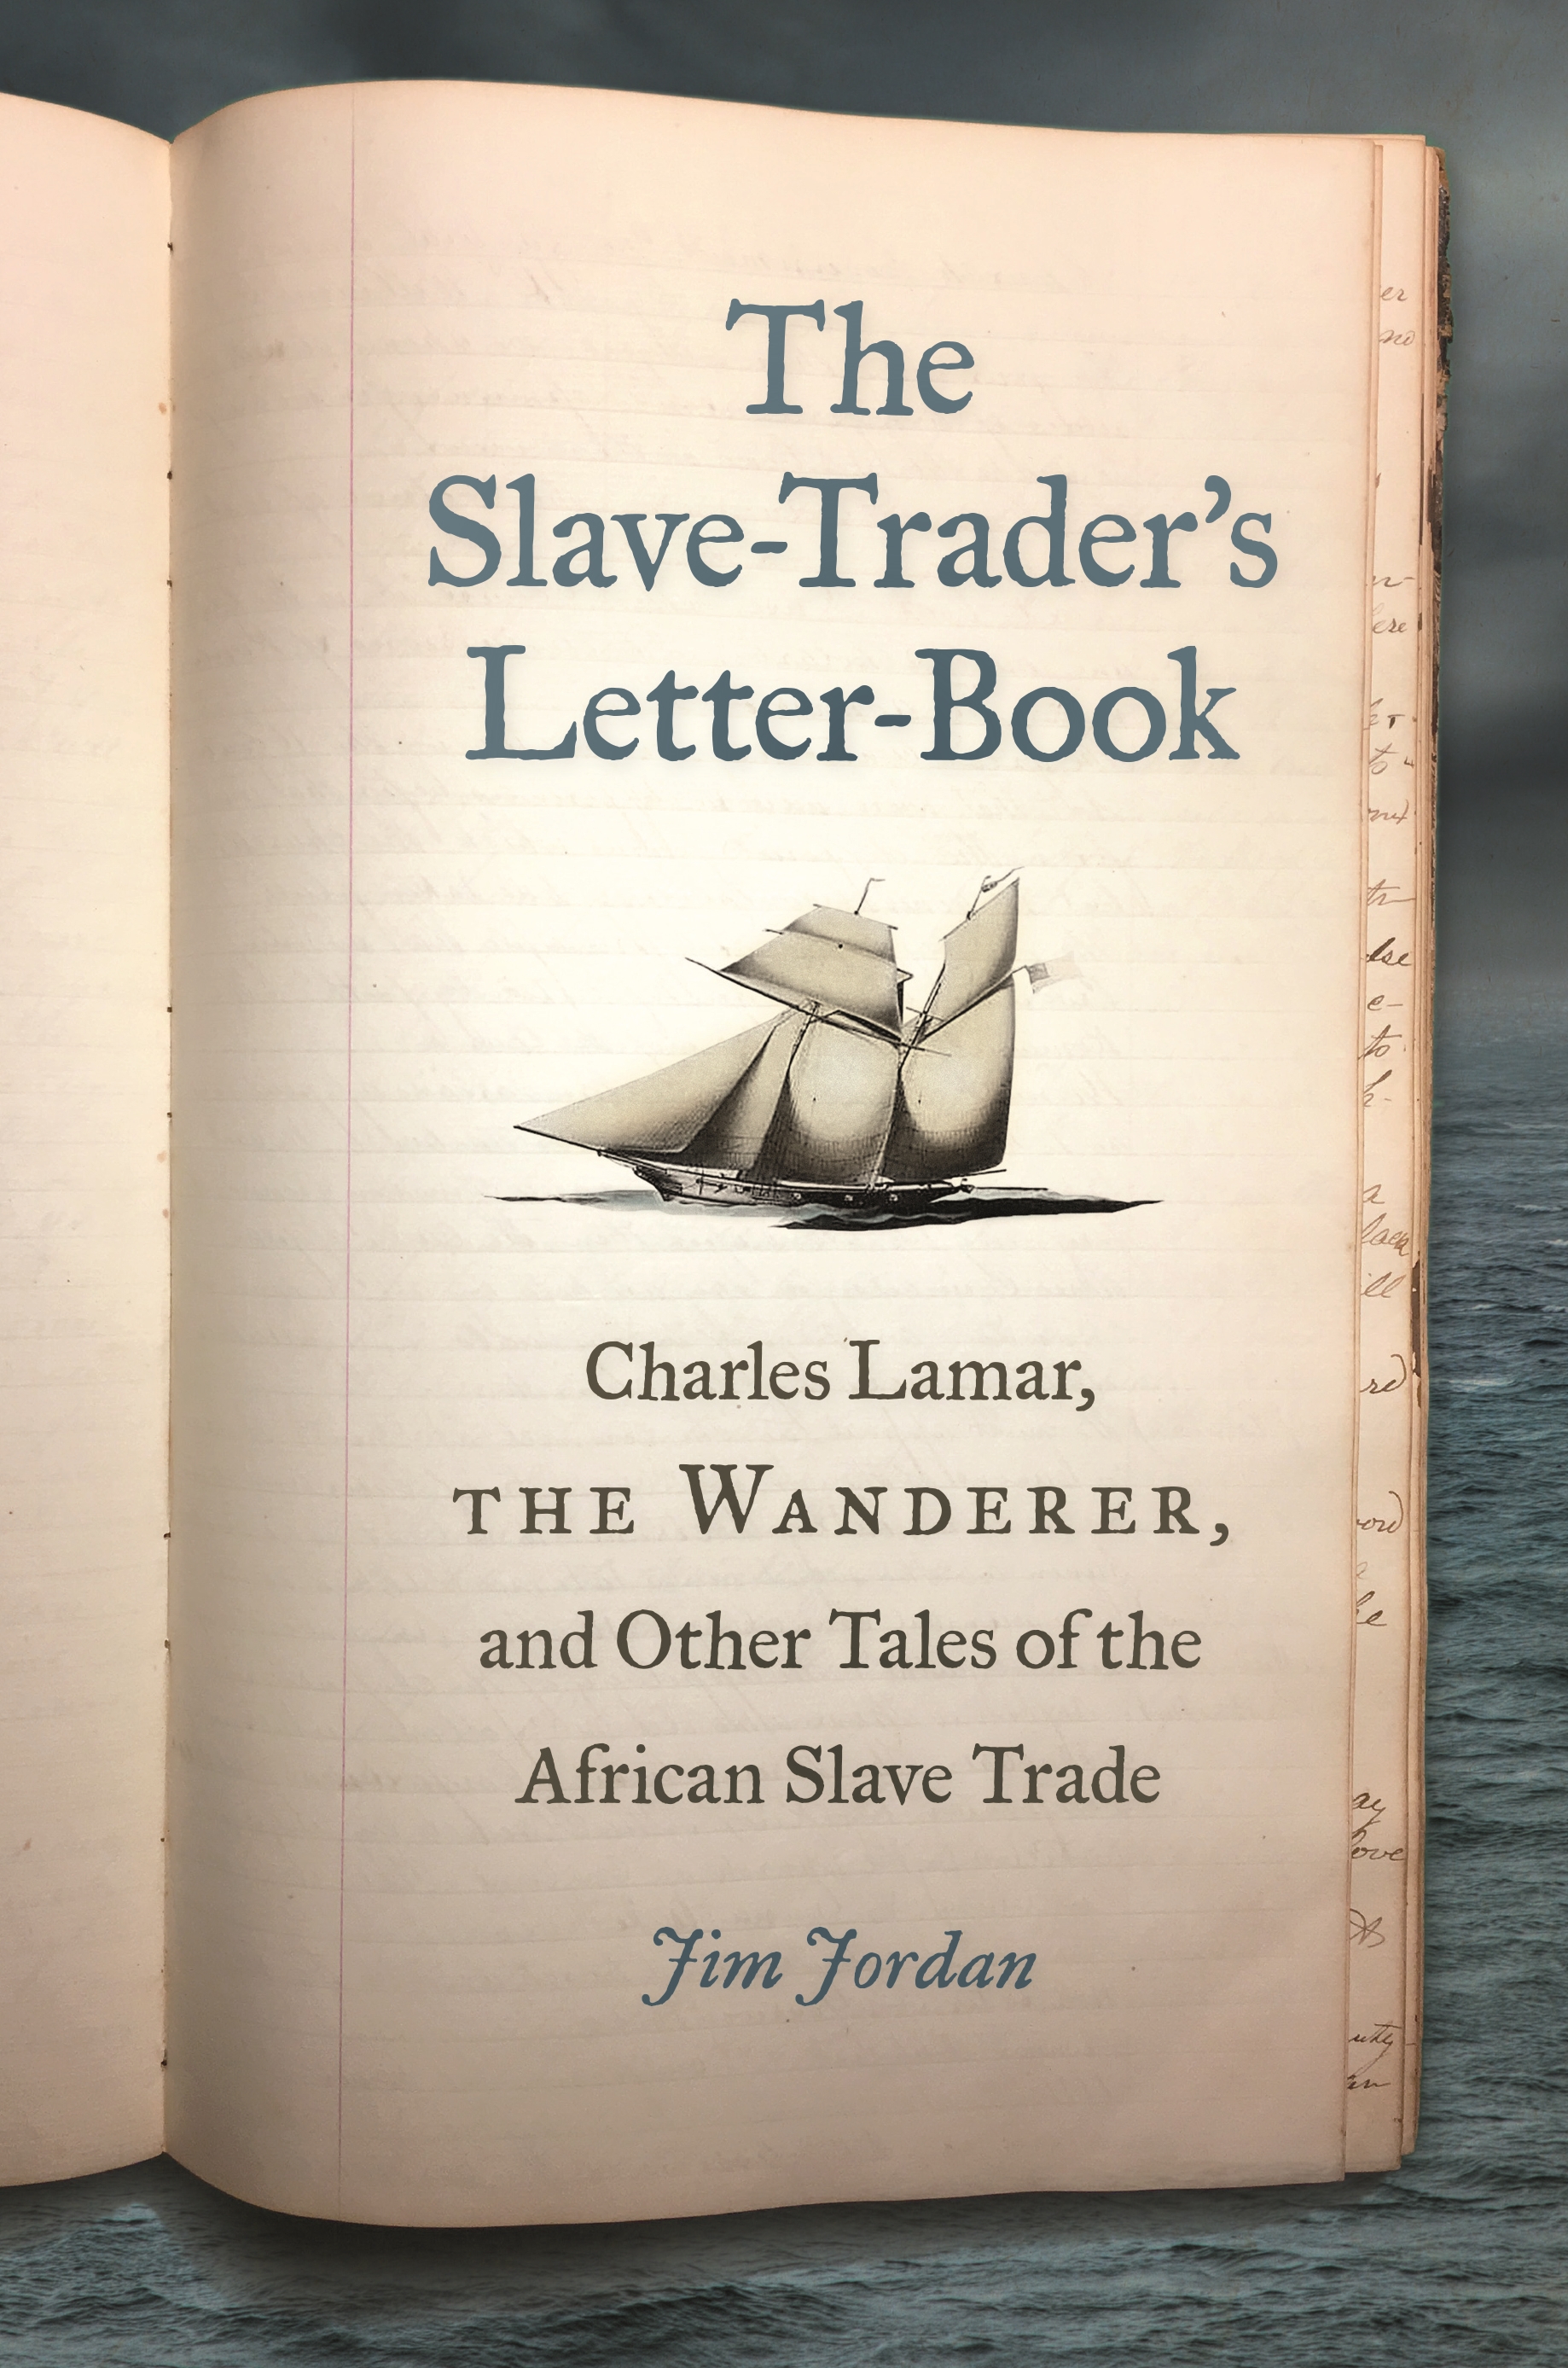 The Slave-Trader's Letter-Book: Charles Lamar, the Wanderer, and Other Tales of the African Slave Trade